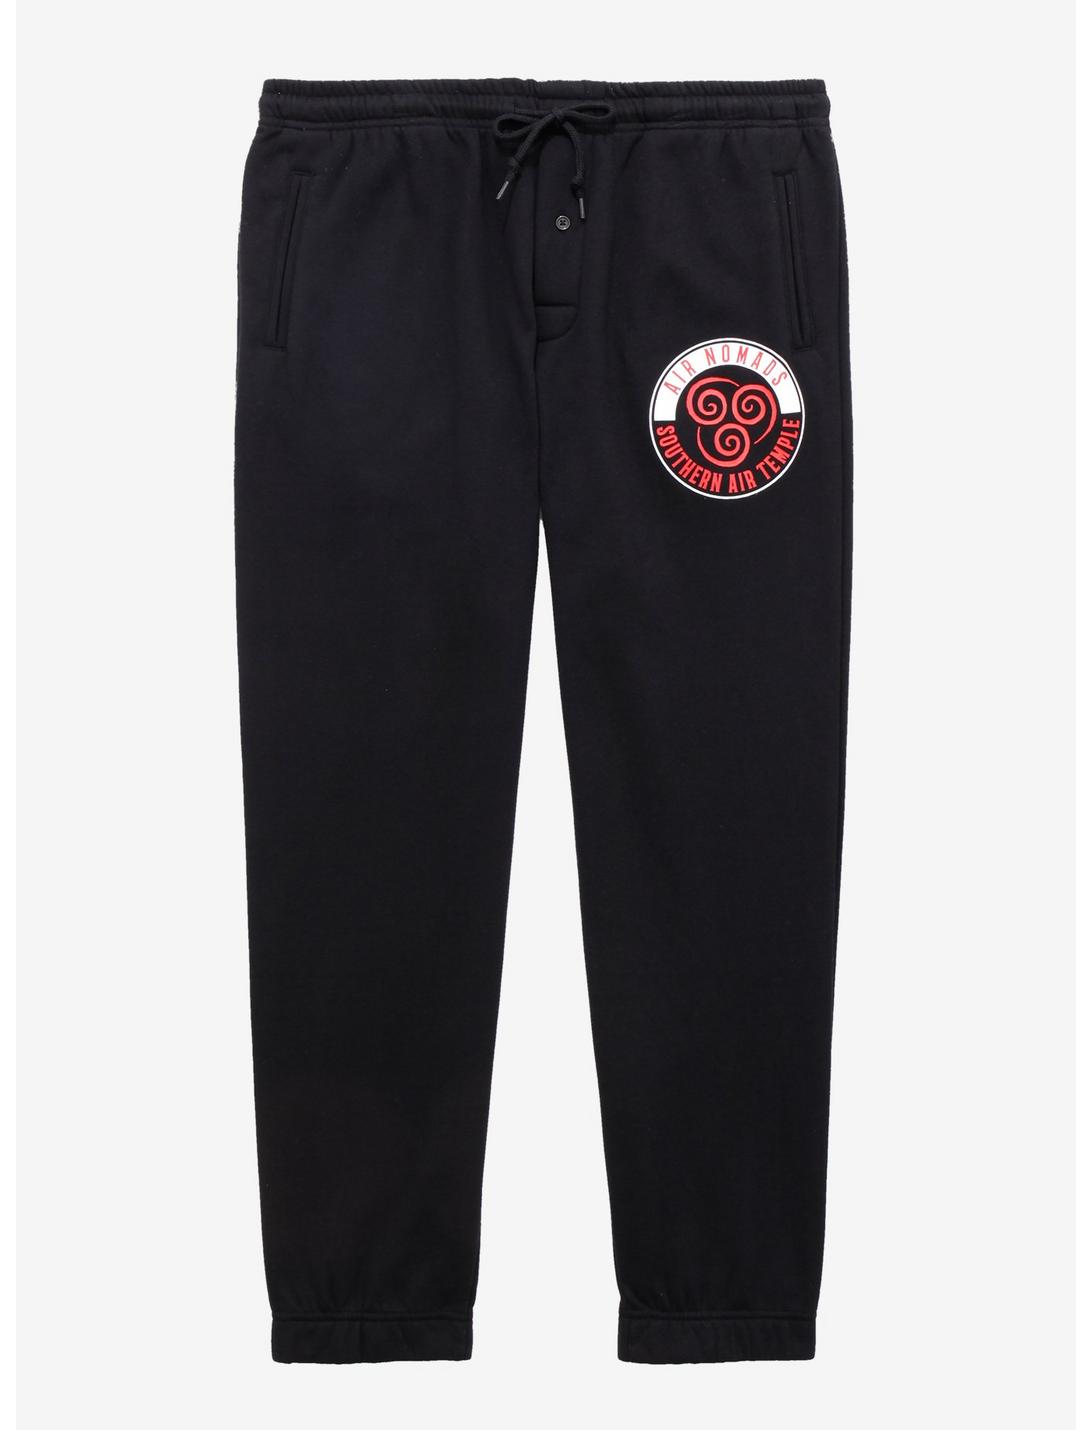 Avatar: The Last Airbender Air Nomads Joggers - BoxLunch Exclusive, BLACK, hi-res